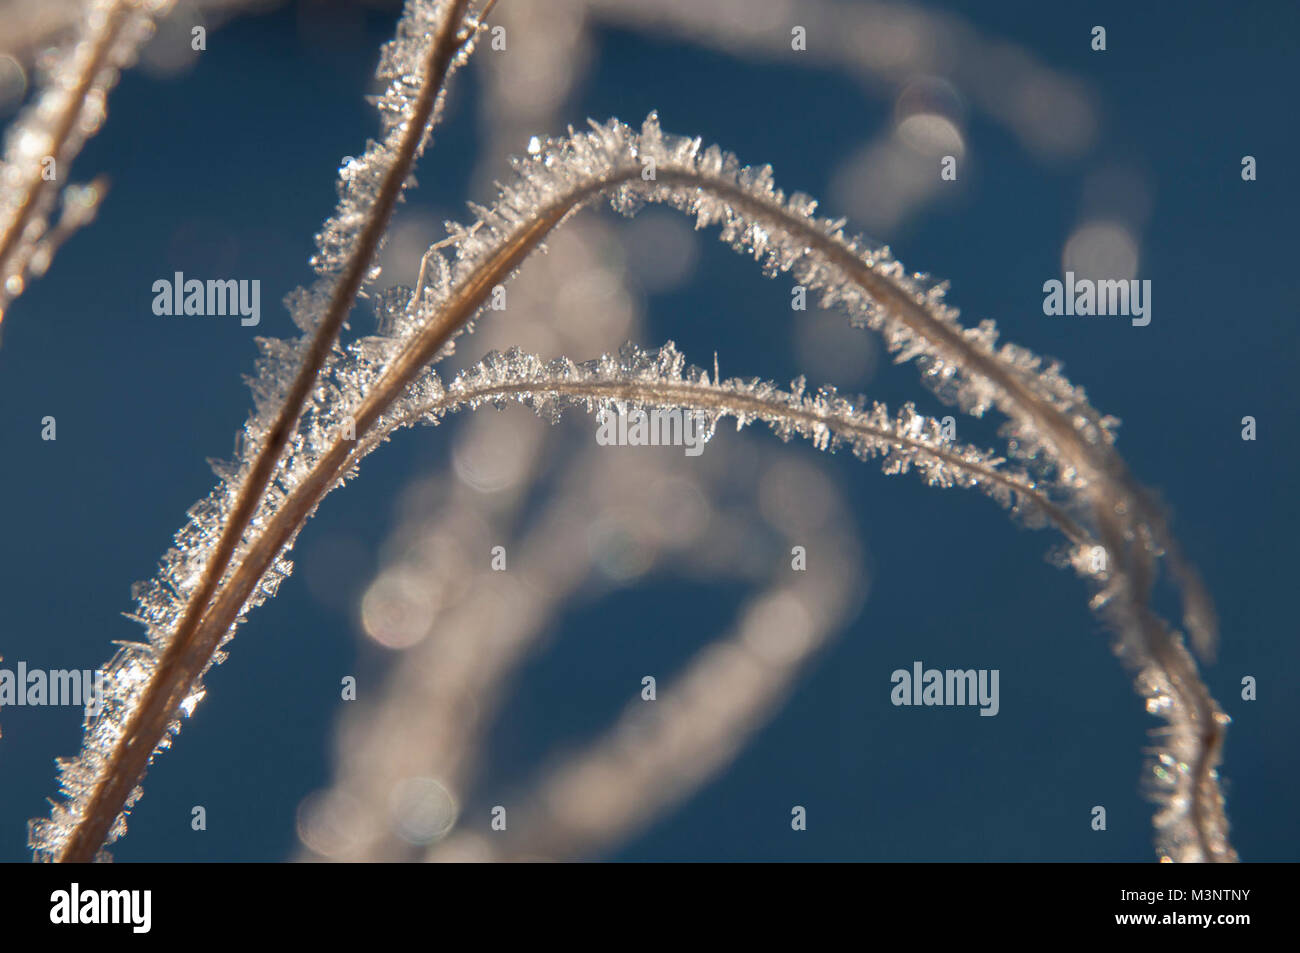 Hoar frost on Indian ricegrass Stock Photo